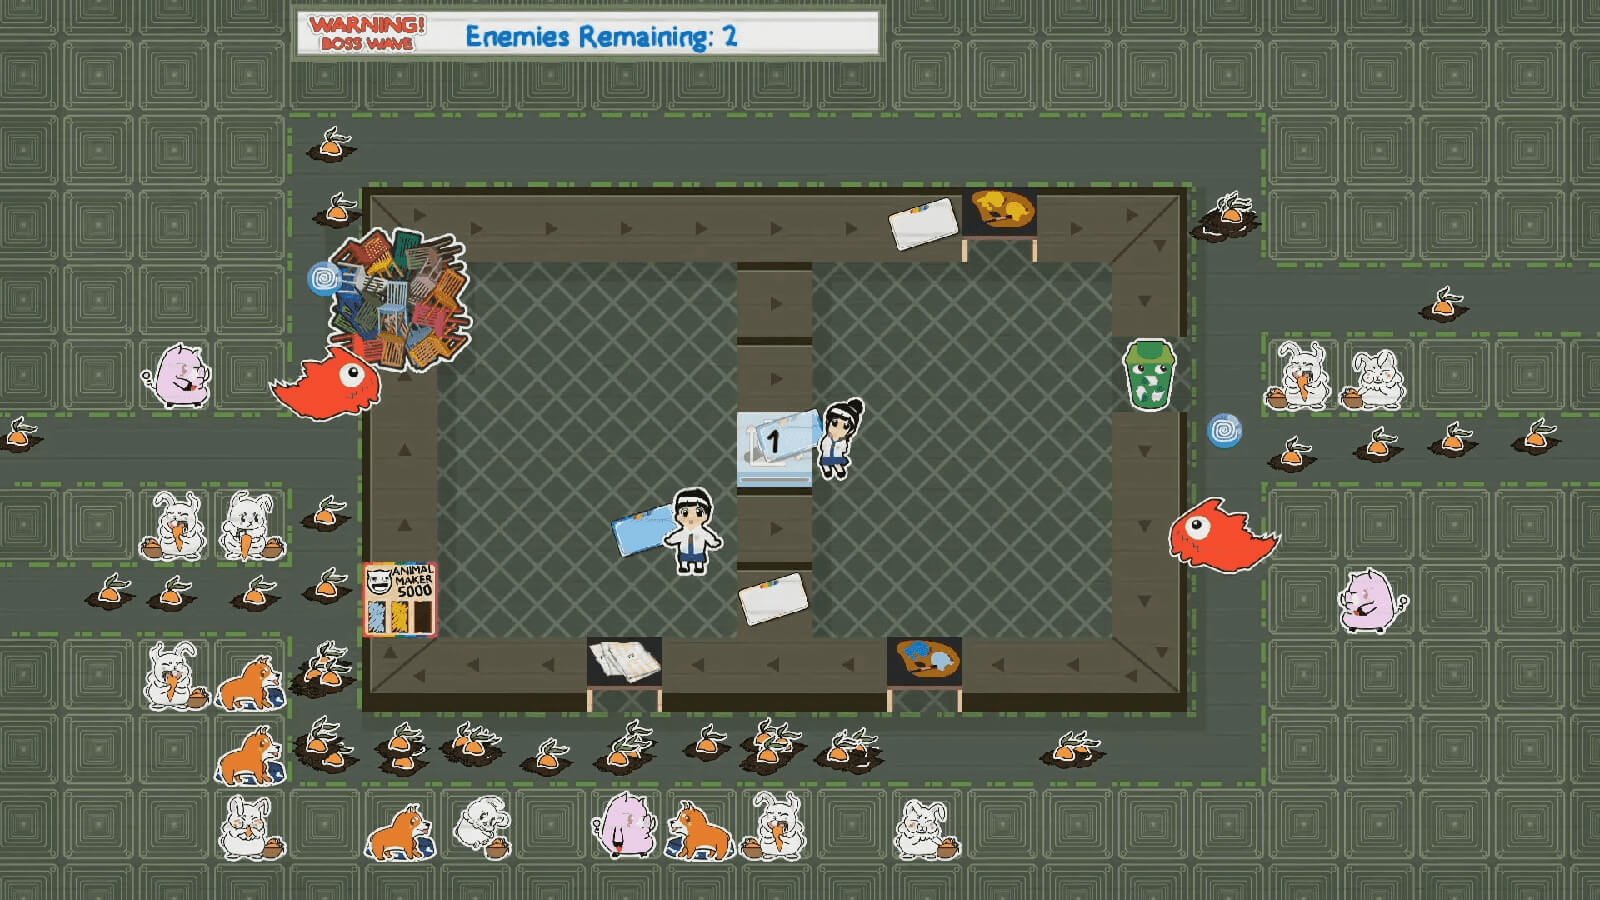 In a top-down view, a boy and girl are creating stickers surrounded by animal stickers and oncoming enemies.